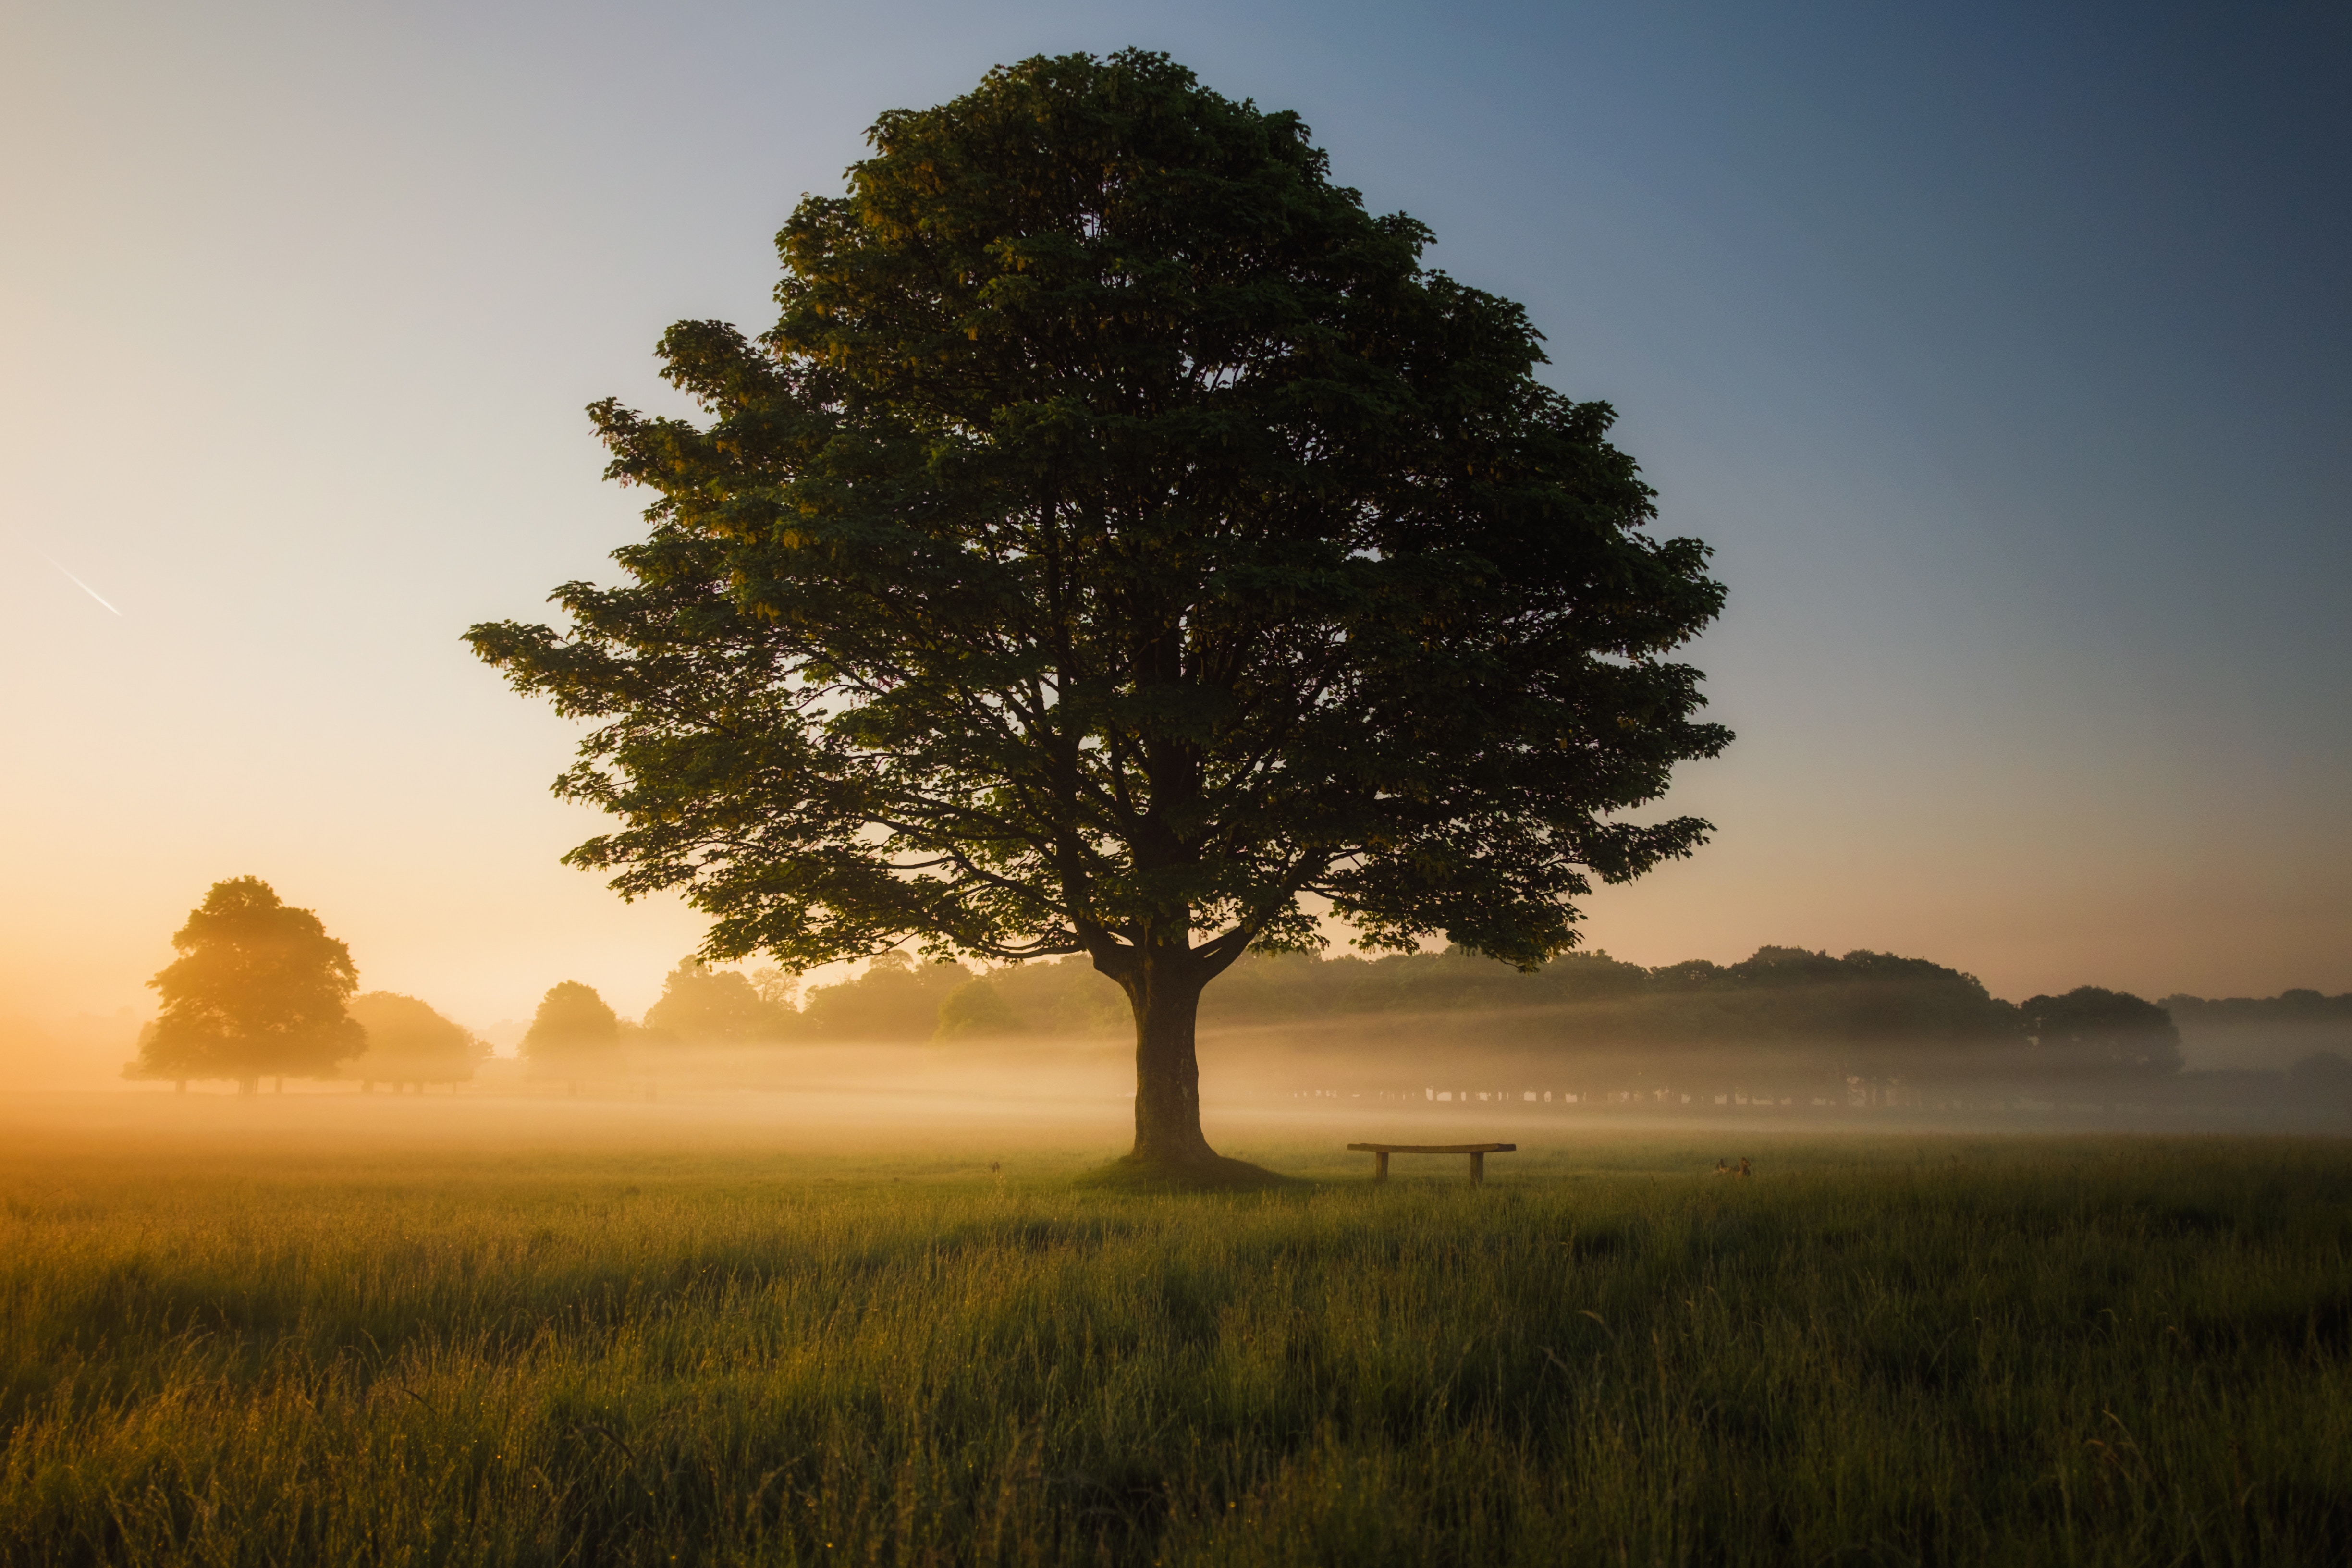 A large tree sits in a field of green grass and early morning fog, perfect for reflecting on the past and contemplating the future